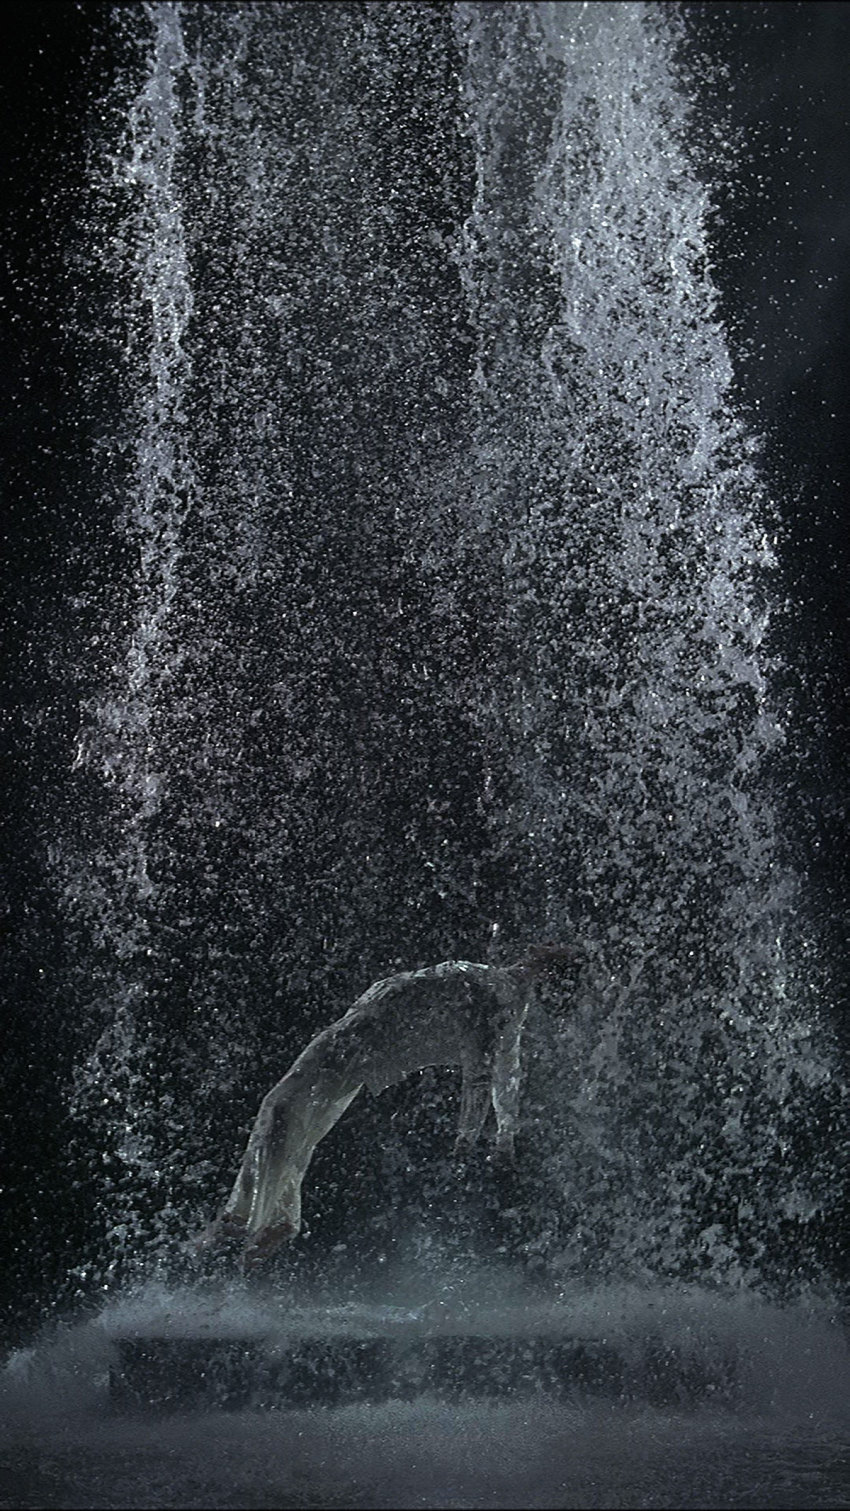 Bill Viola, Tristan’s Ascension (The Sound of a Mountain Under a Waterfall)